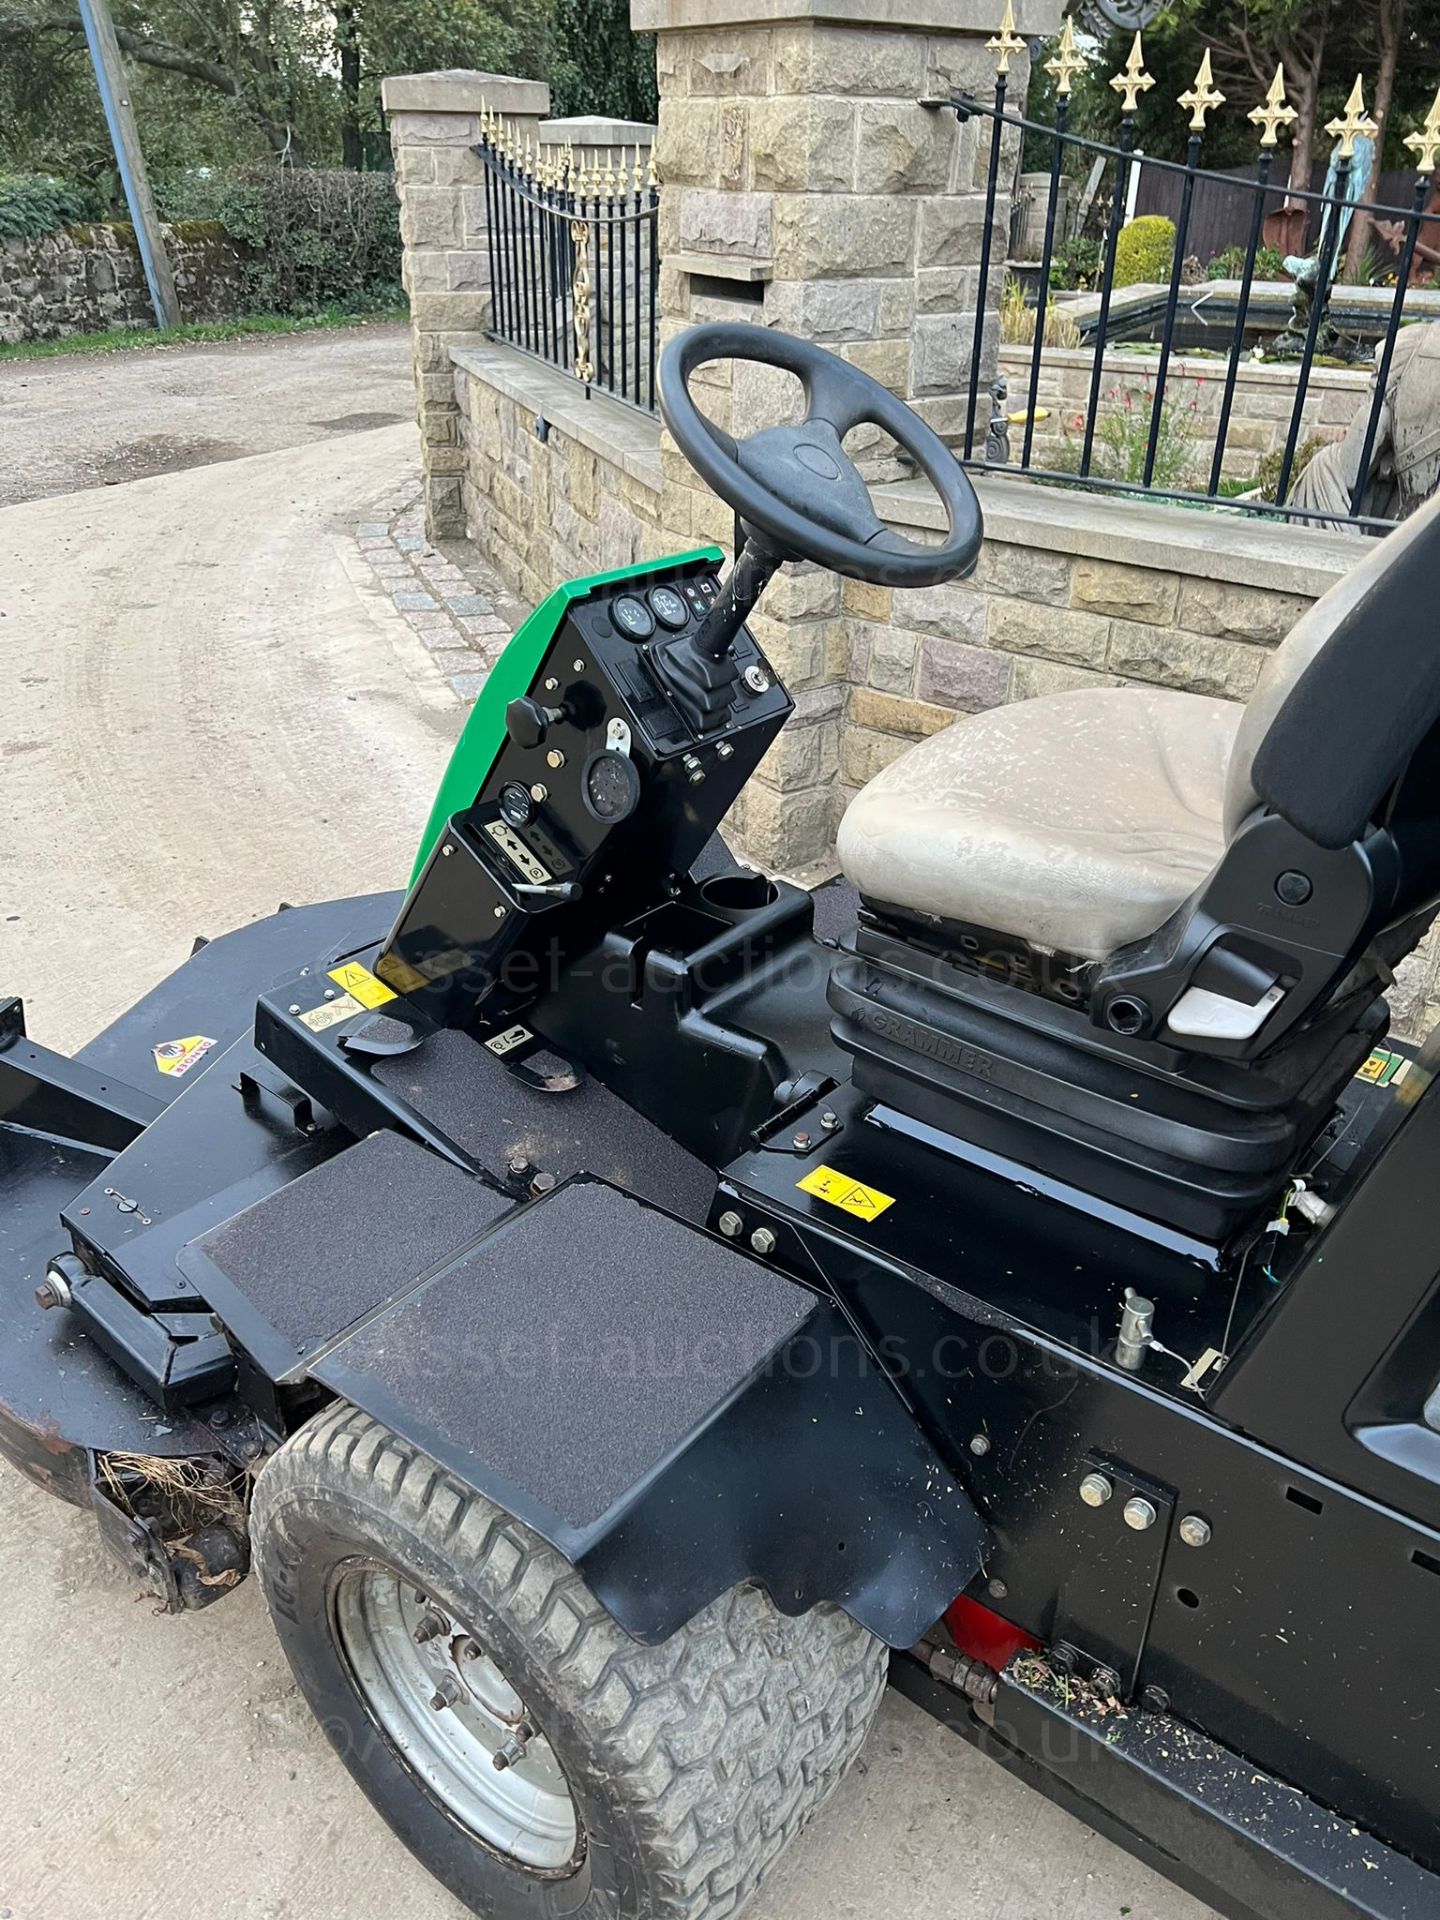 RANSOMES HR3806 RIDE ON LAWN MOWER, RUNS WORKS AND CUTS, 814 RECORDED HOURS, 4 WHEEL DRIVE *NO VAT* - Image 6 of 8